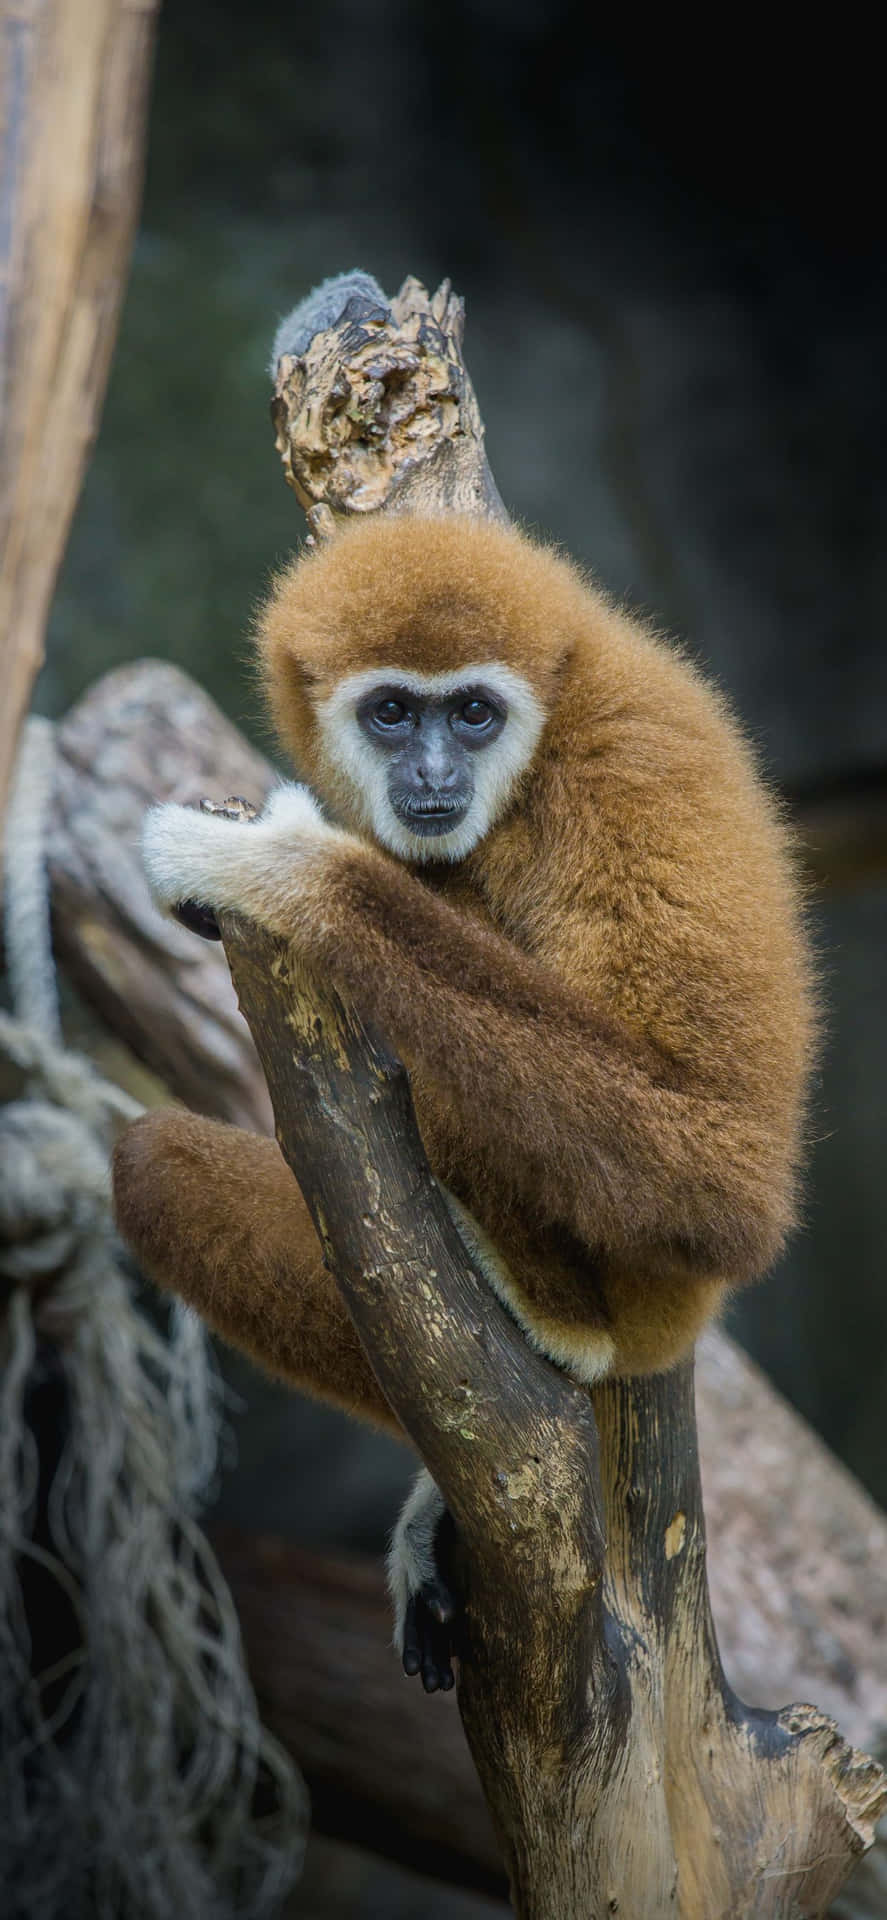 A Monkey Sitting On A Branch With A Branch